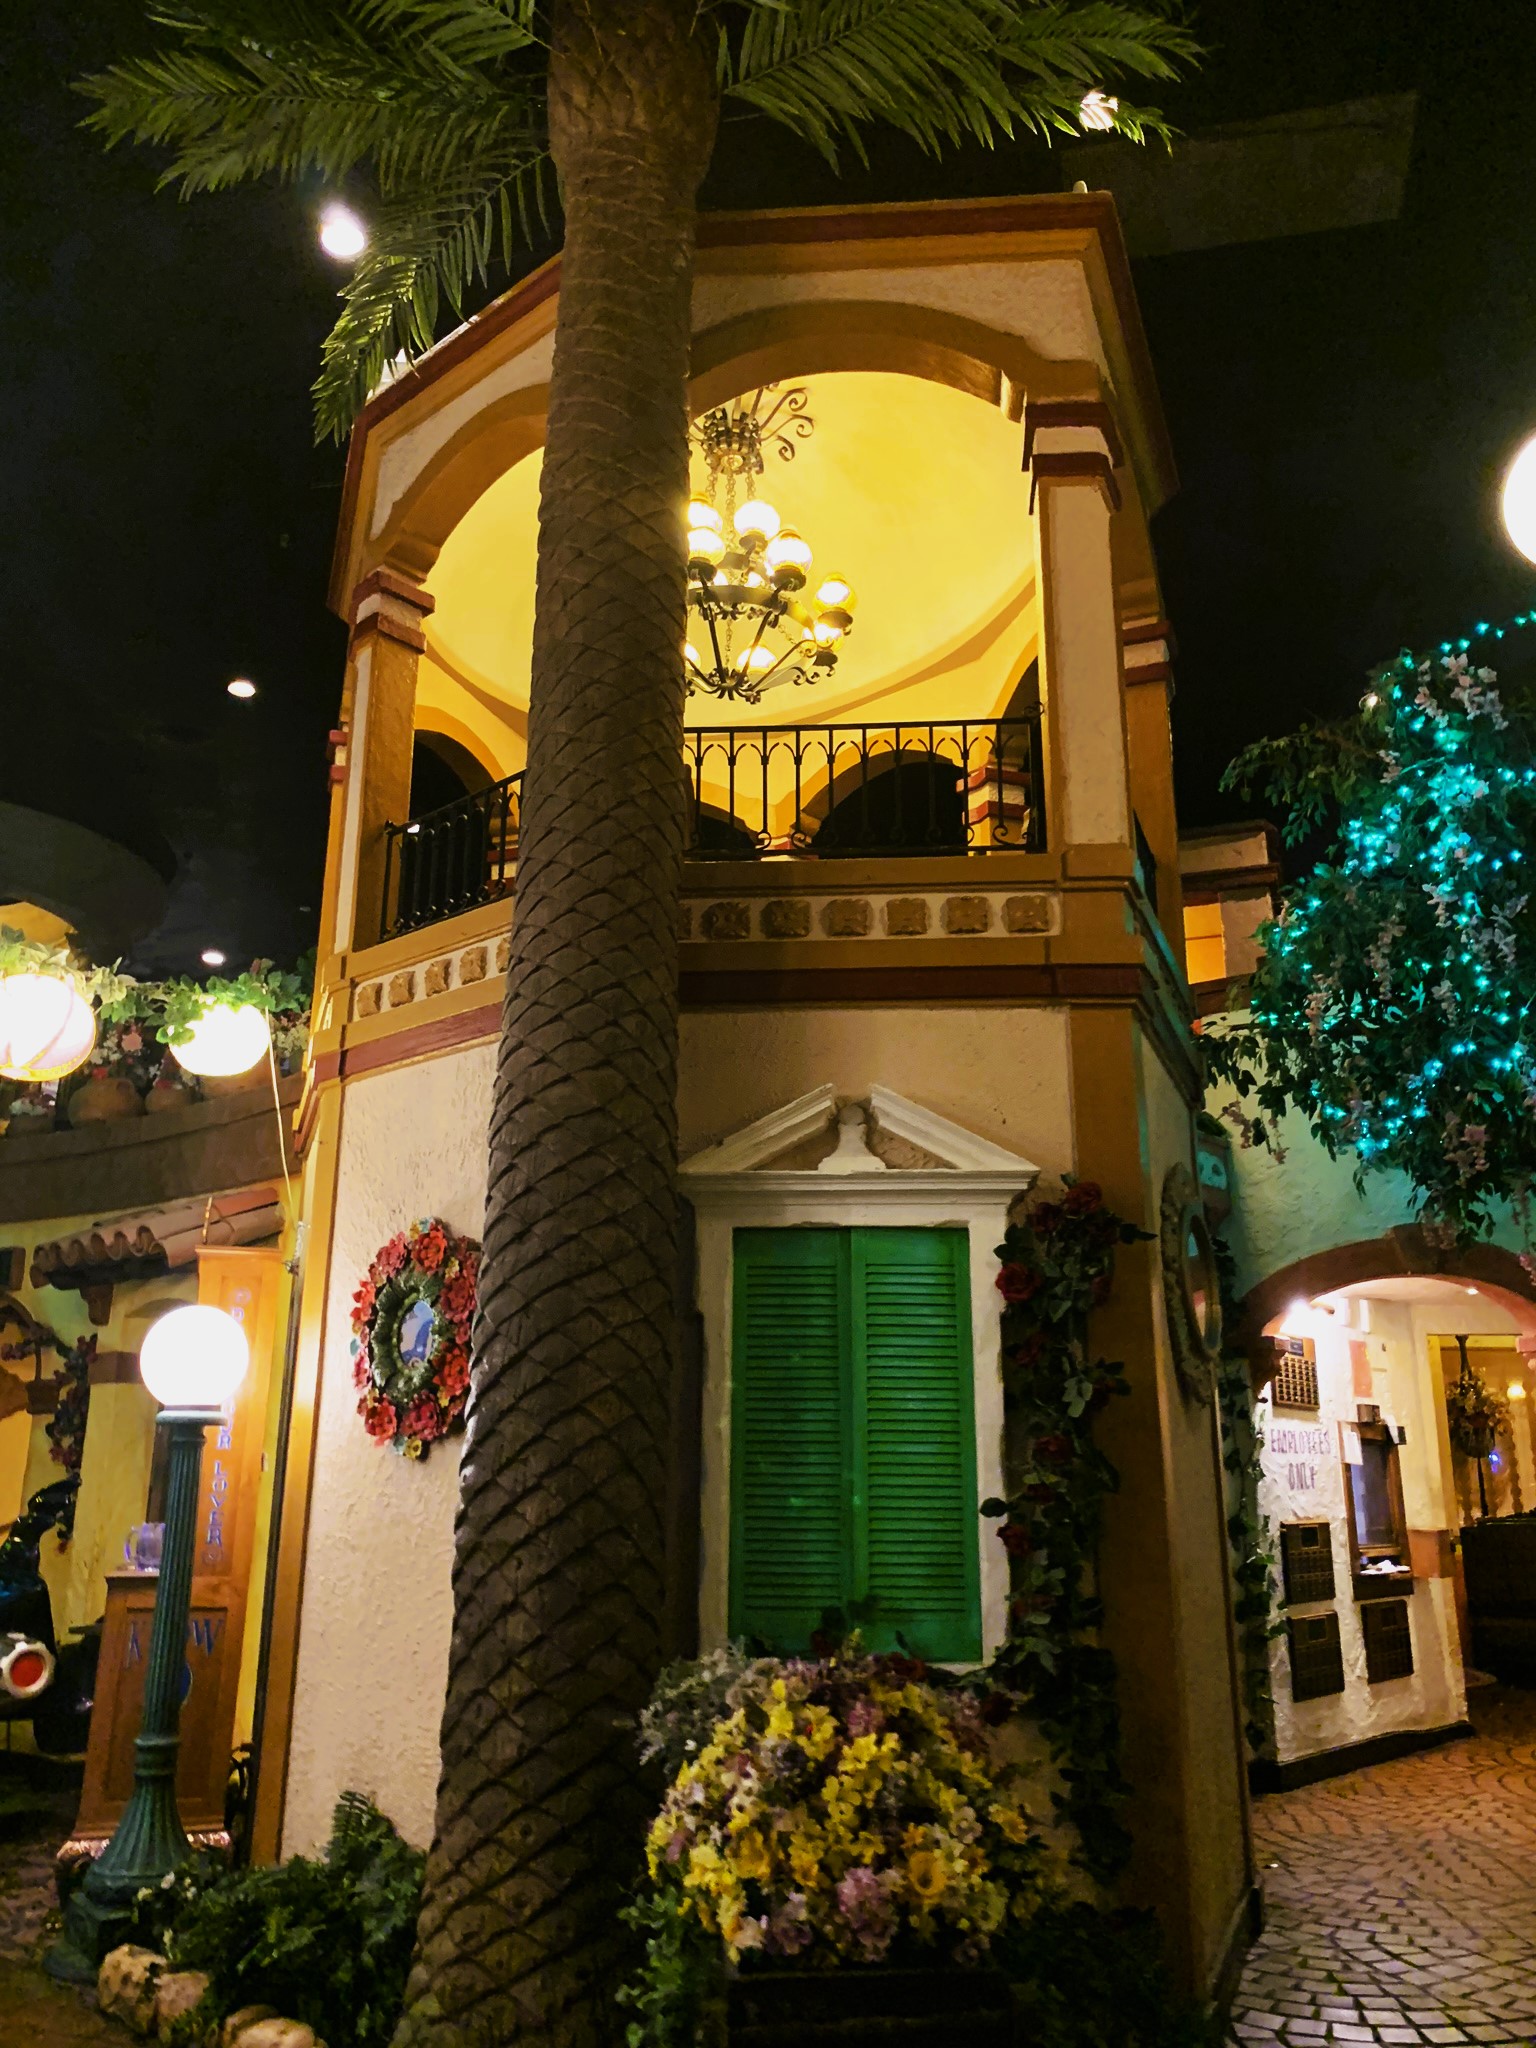 Casa Bonita’s interior makes visitors feel like they have walked into a beautiful Mexican town.